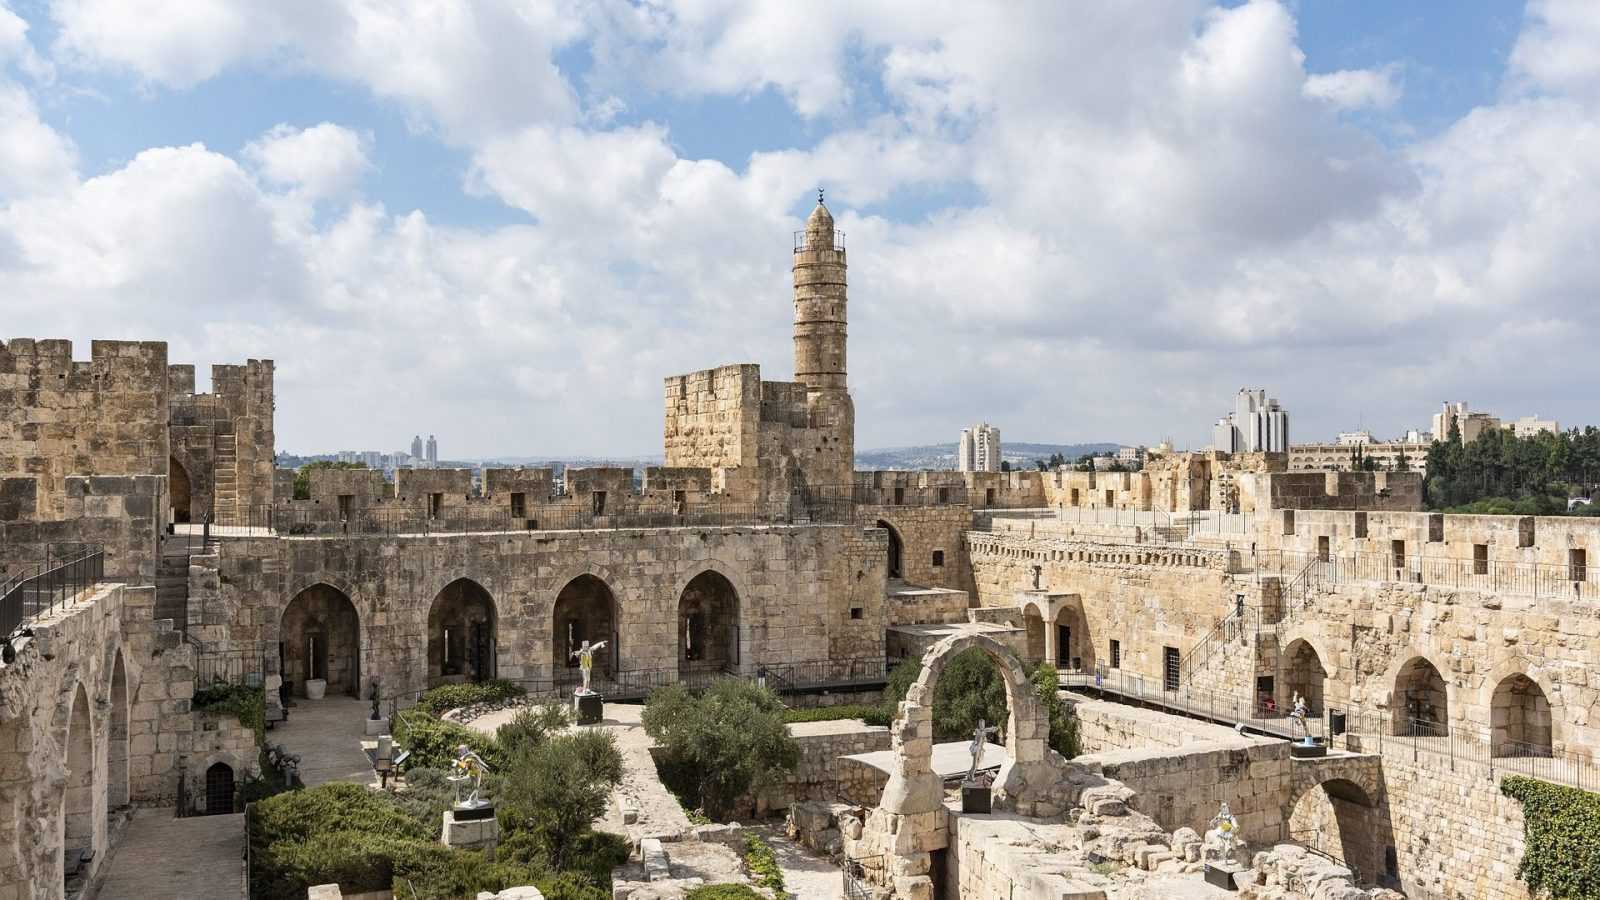 City of David, on of the biblical sites in Israel